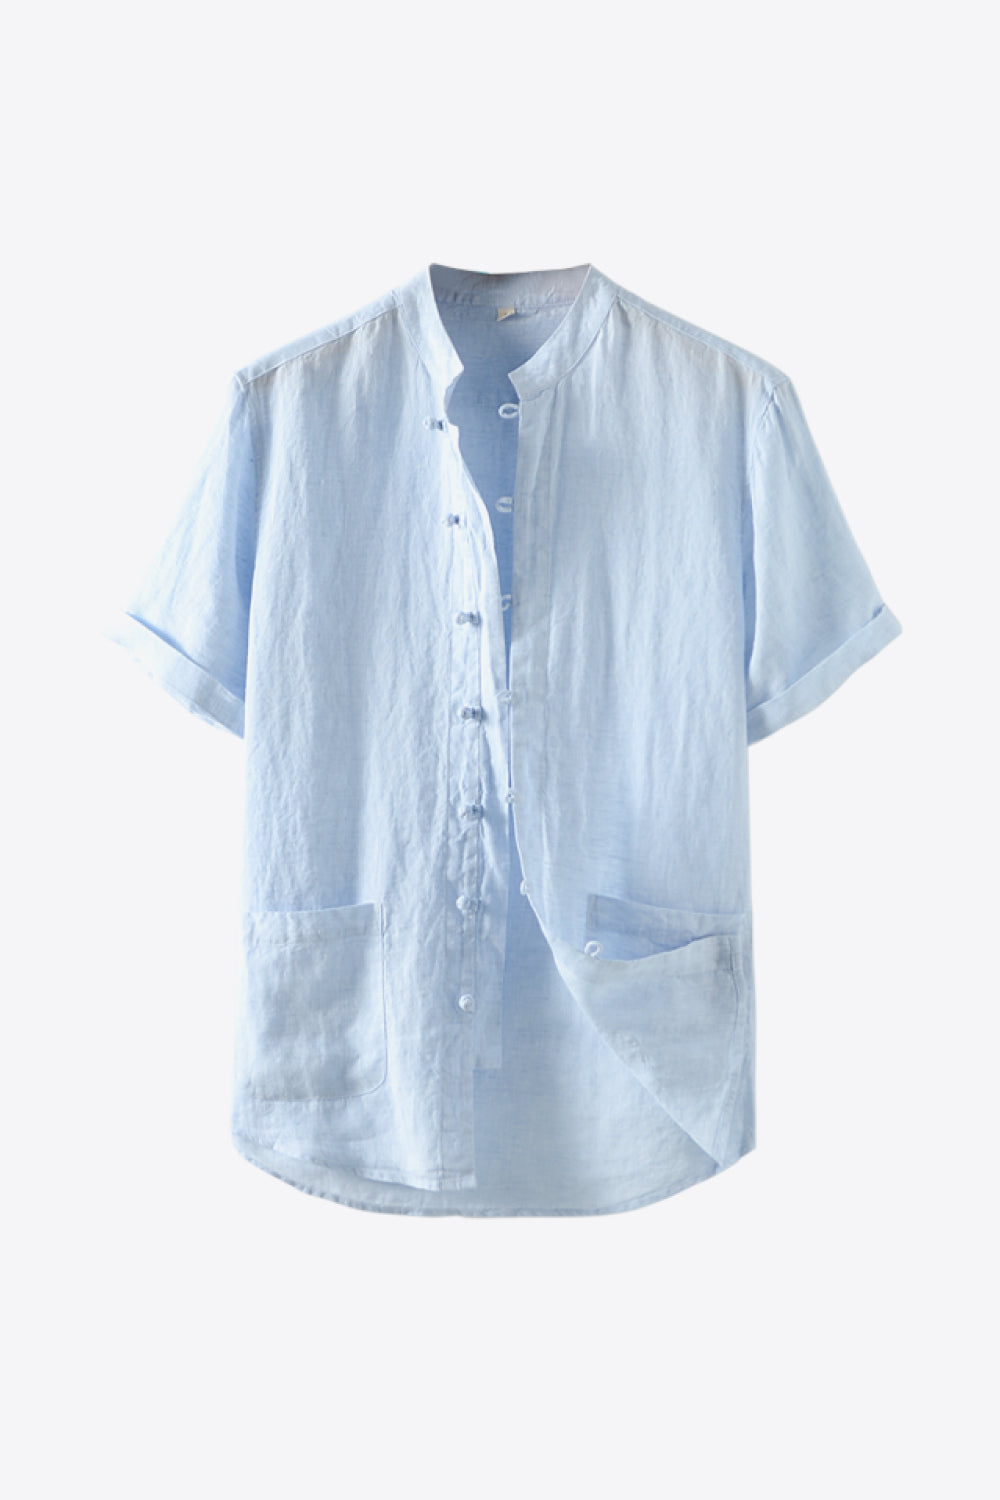 Buttoned Round Neck Short Sleeve Linen Shirt with Pockets_15